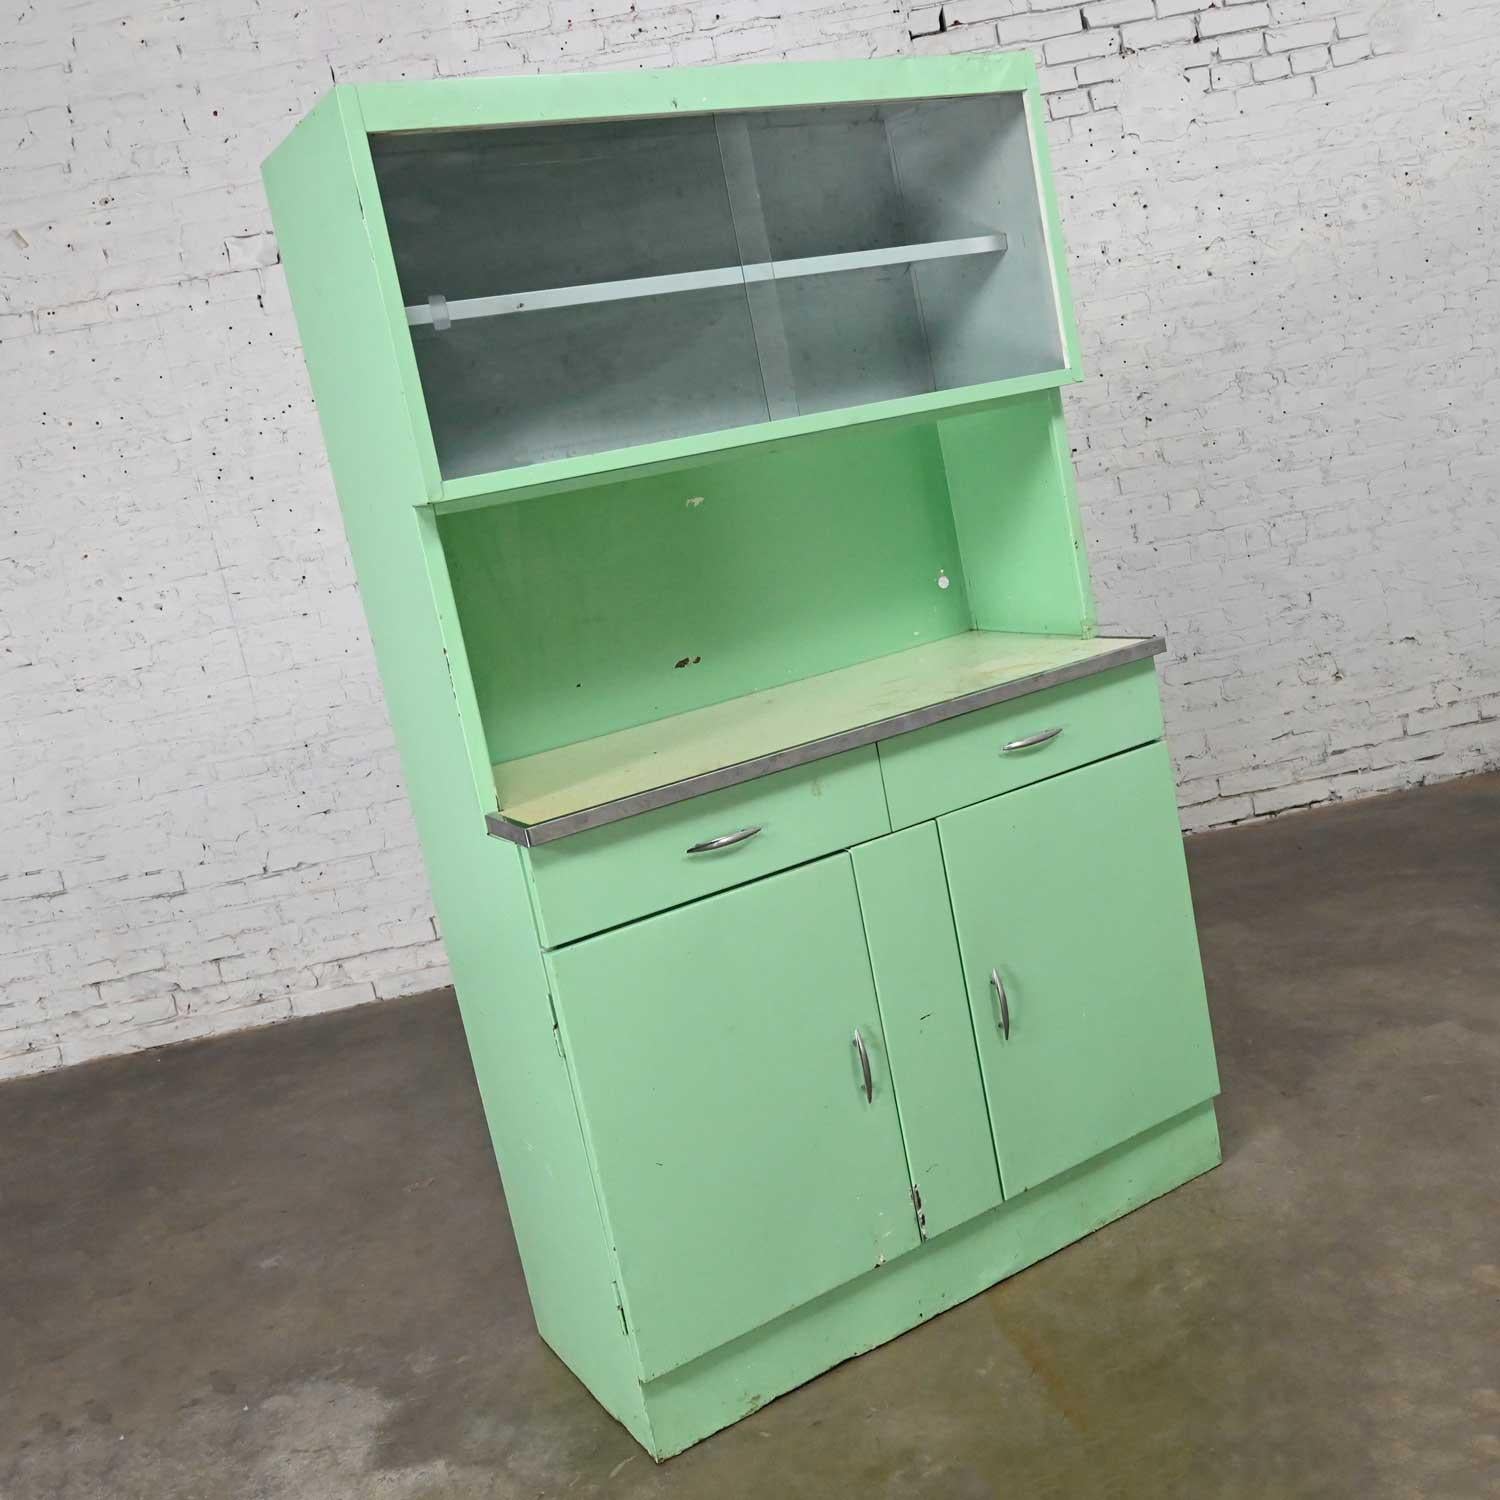 Handsome vintage Industrial turquoise metal cupboard or cabinet with upper sliding glass doors and chrome hardware. Beautiful condition, keeping in mind that this is vintage and not new so will have signs of use and wear. There is an all-over